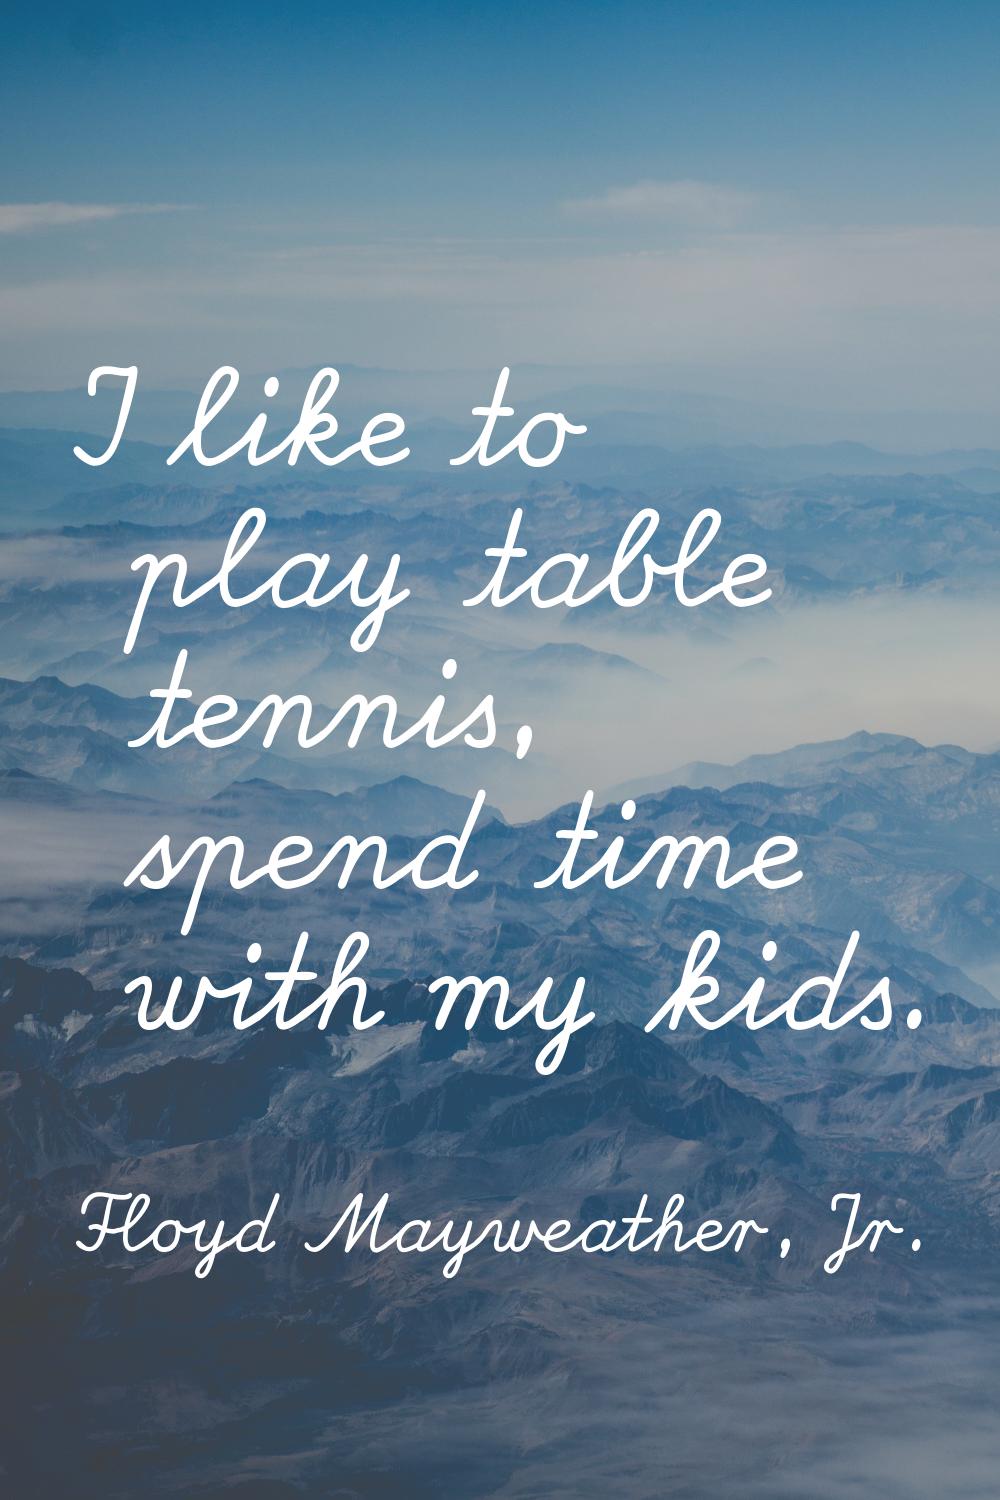 I like to play table tennis, spend time with my kids.